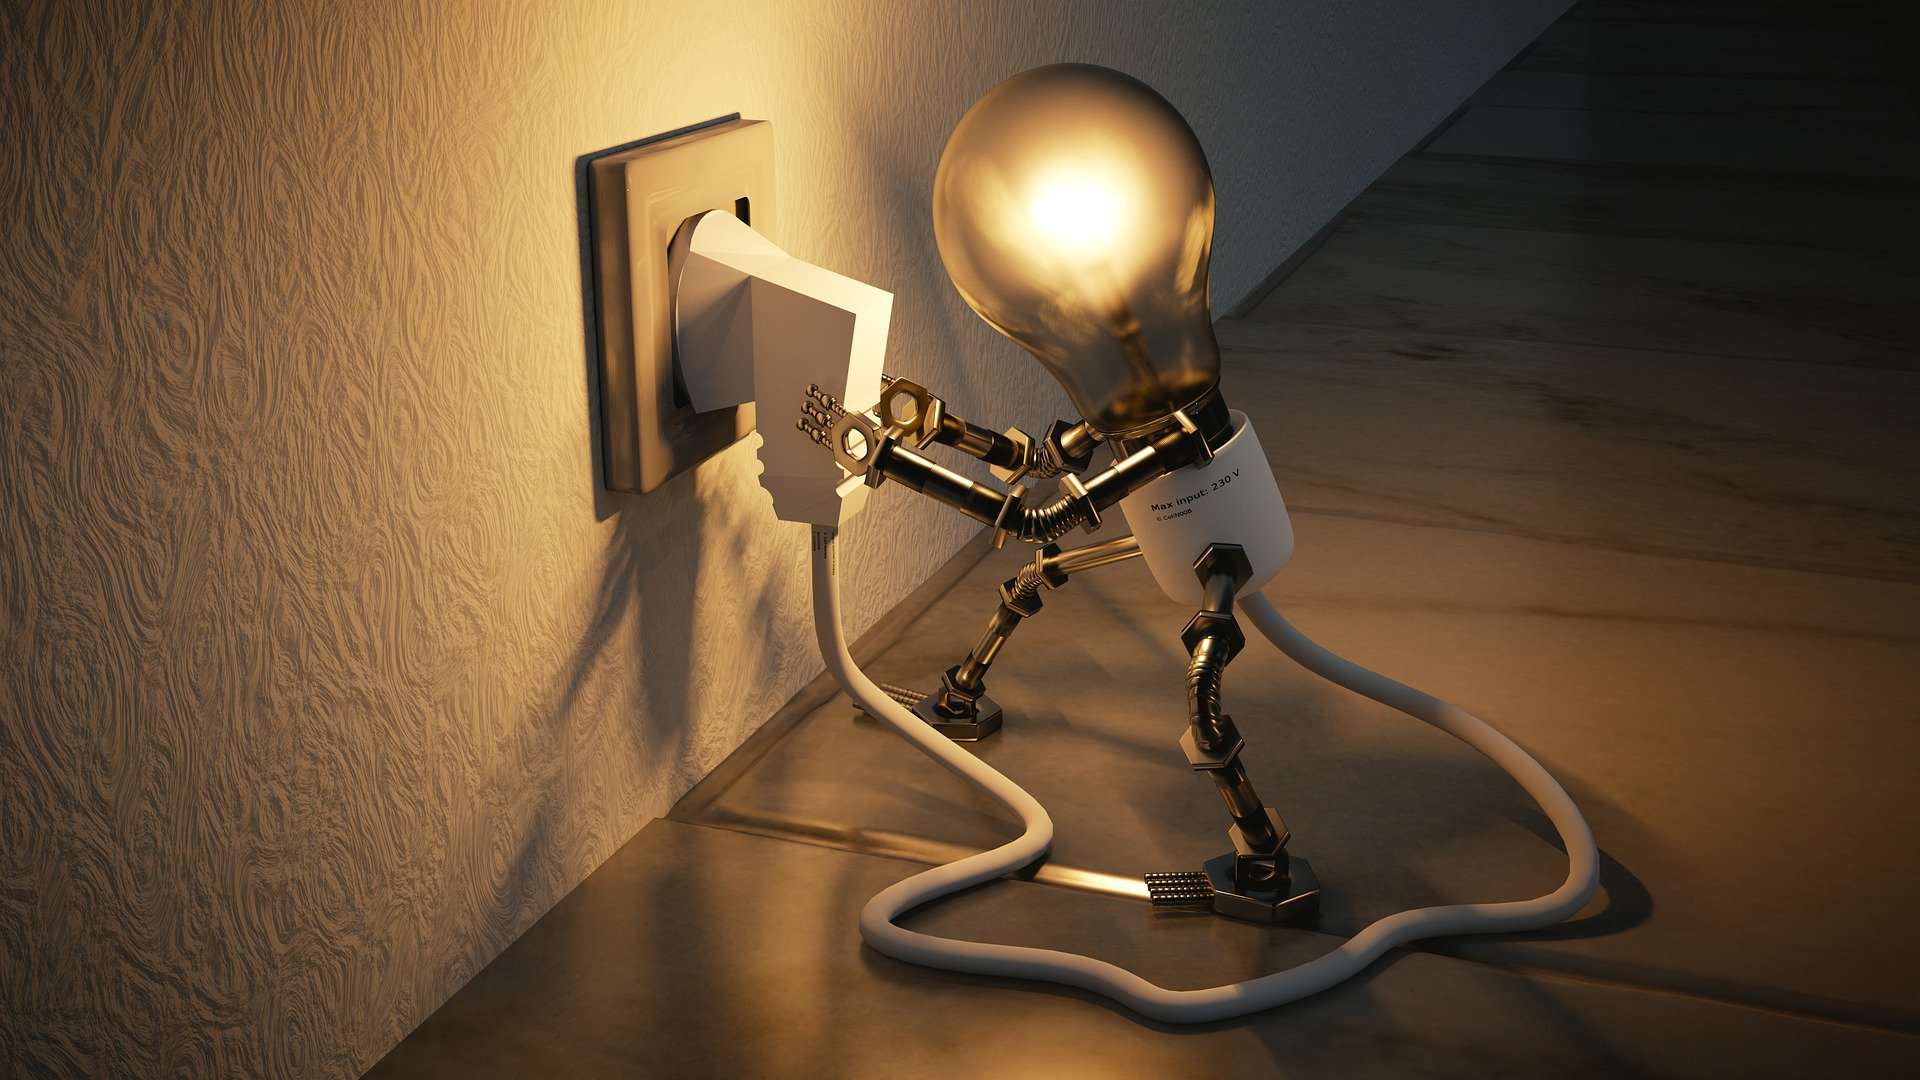 Lightbulb plugging itself into a wall